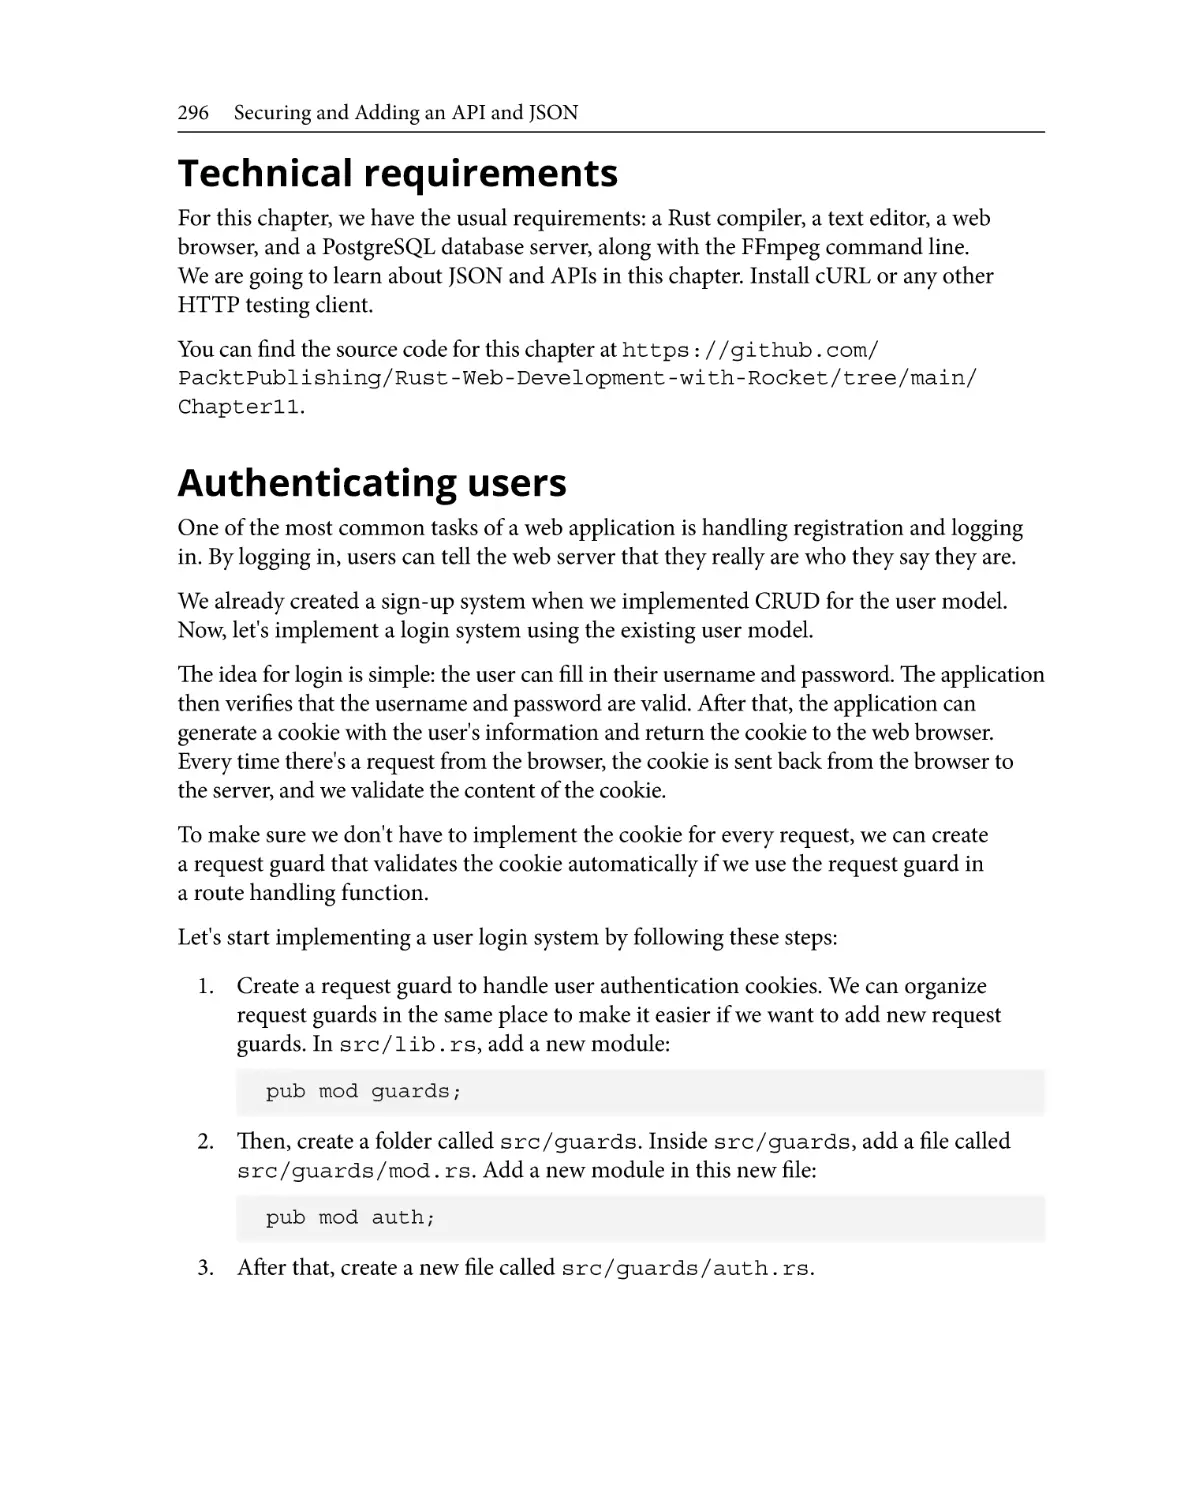 Technical requirements
Authenticating users